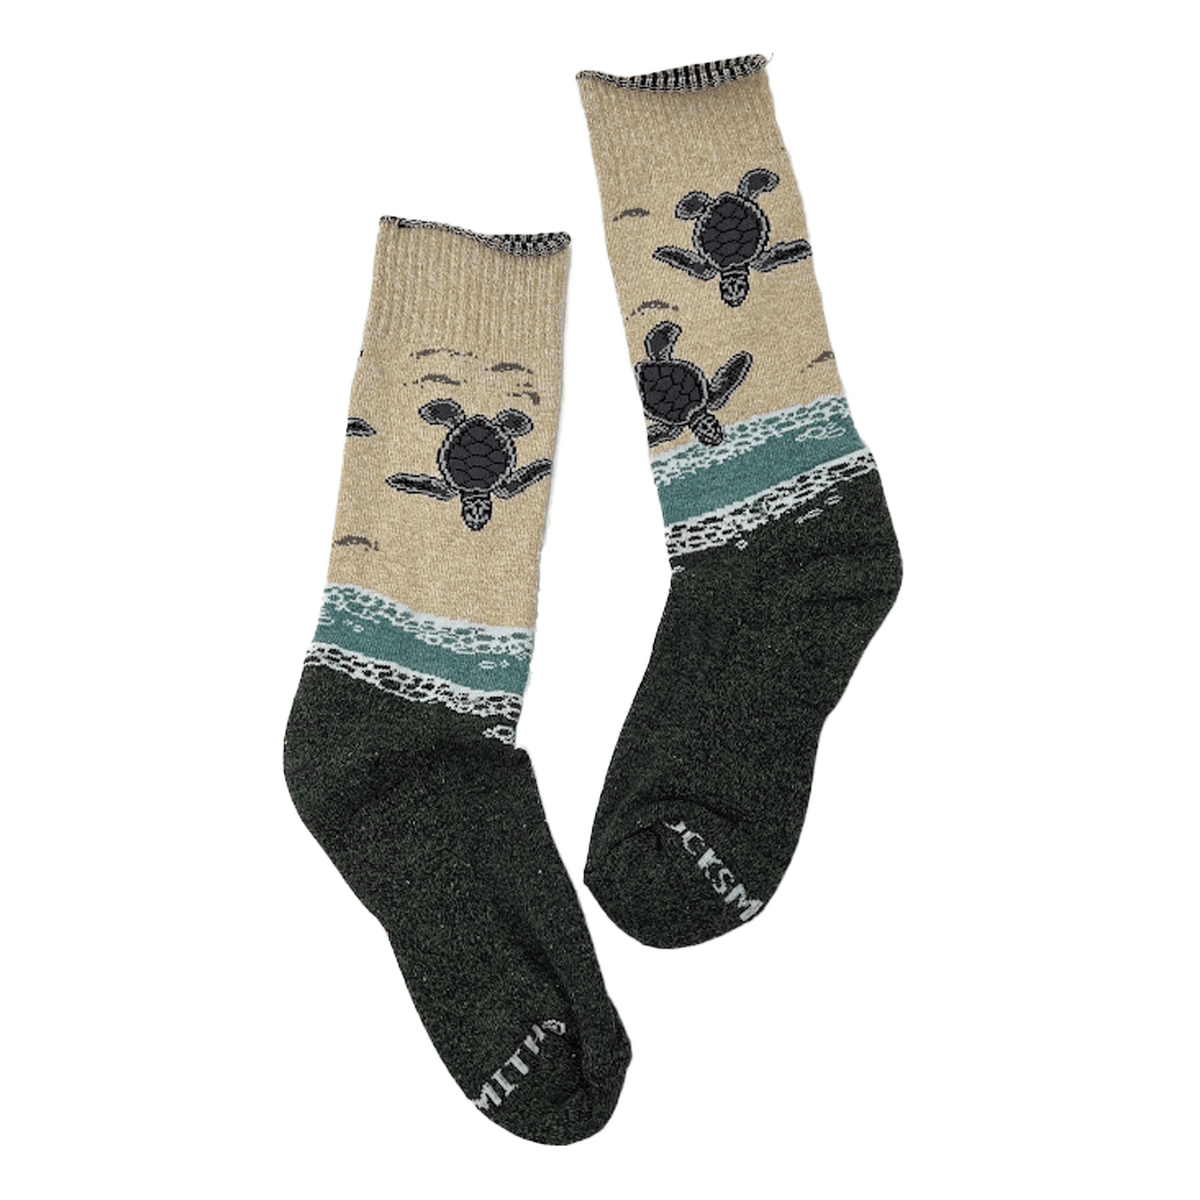 Outlands USA Recycled Cotton Turtle Socks